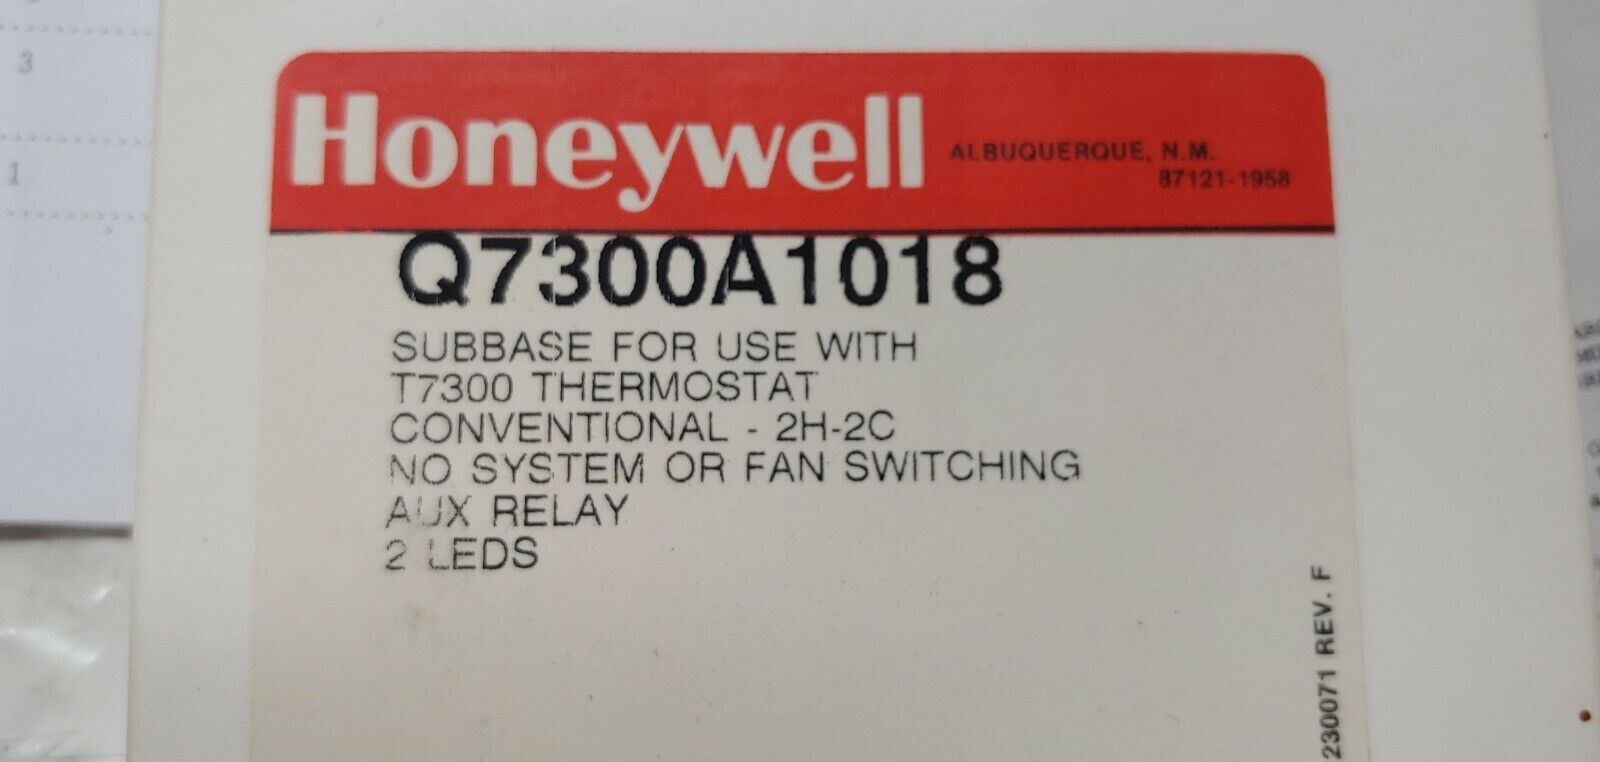 3)HONEYWELL Q7300A1018 Subbase for T7300